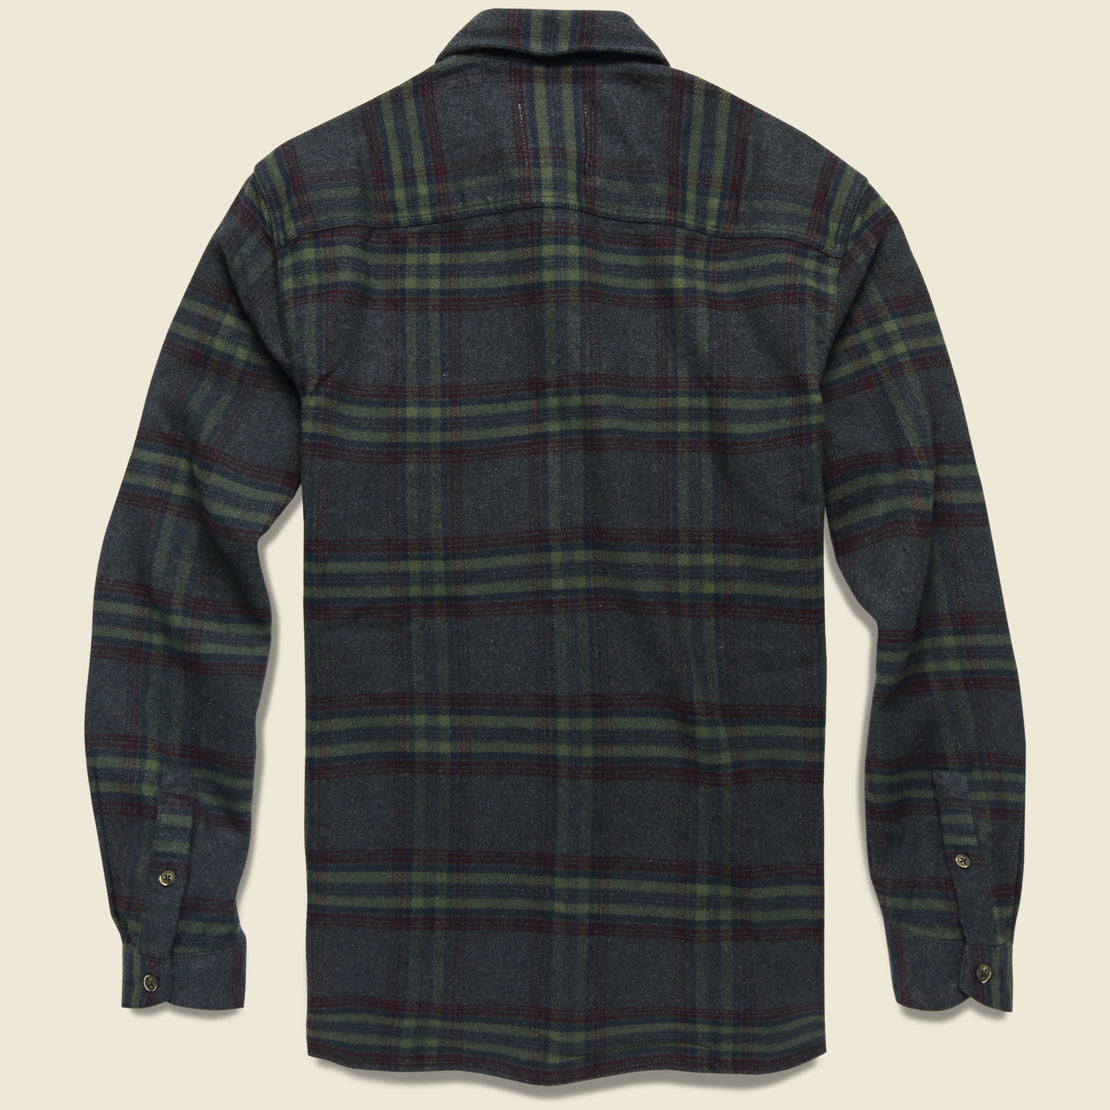 Crysade Plaid Shirt - Heather Charcoal - Life After Denim - STAG Provisions - Tops - L/S Woven - Plaid